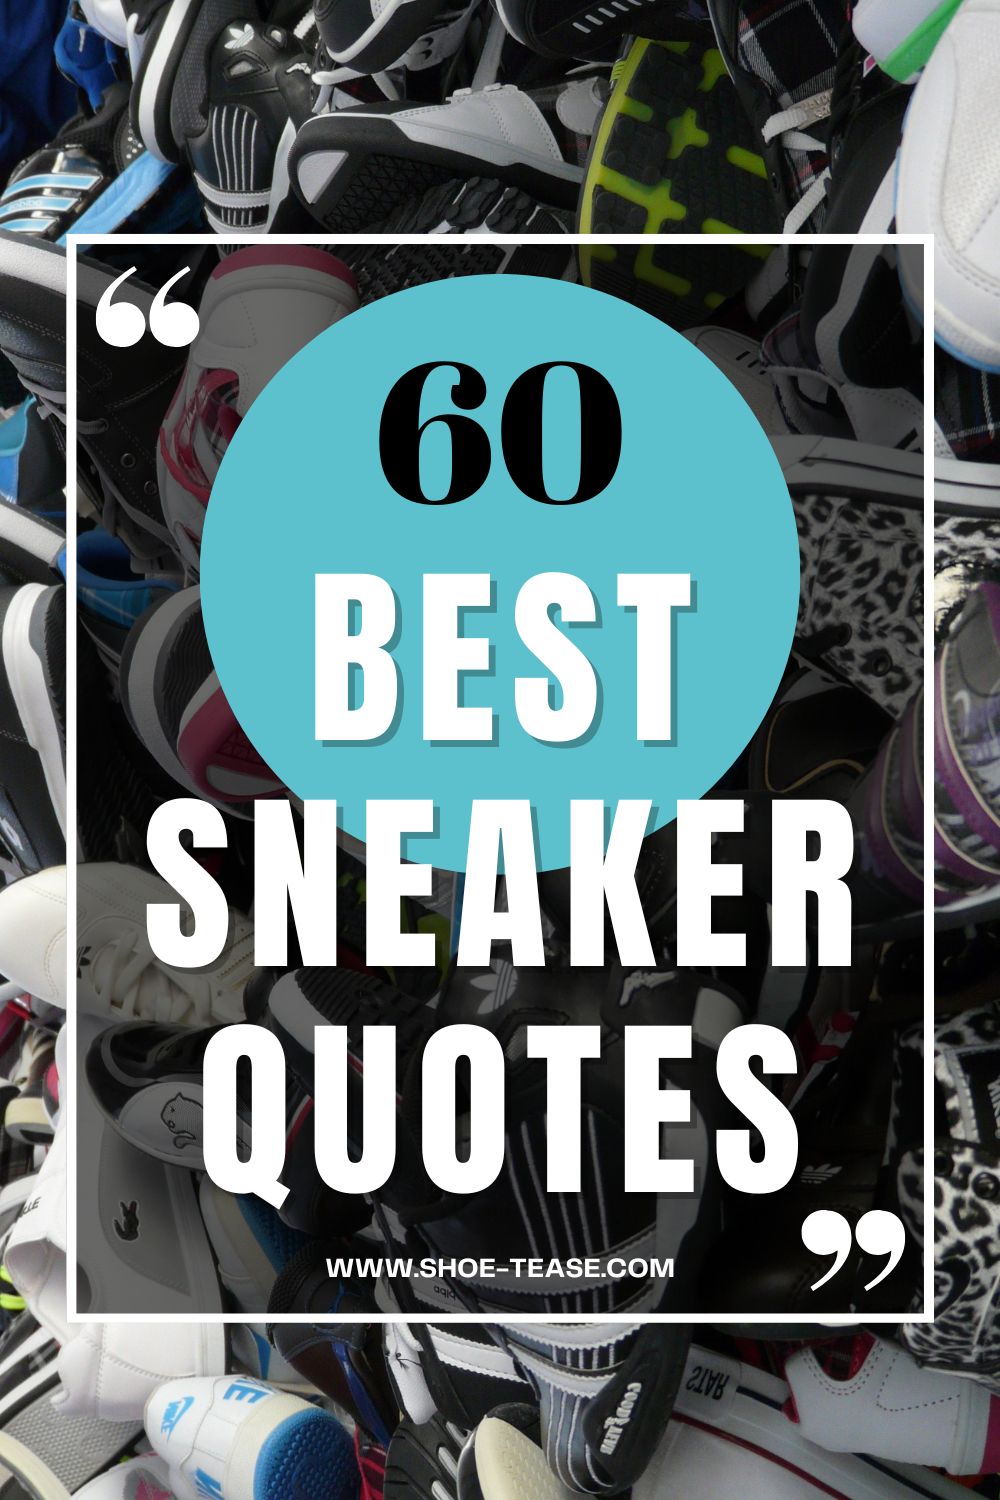 Collage reading 60 best sneaker quotes over image of a pile of sneakers.